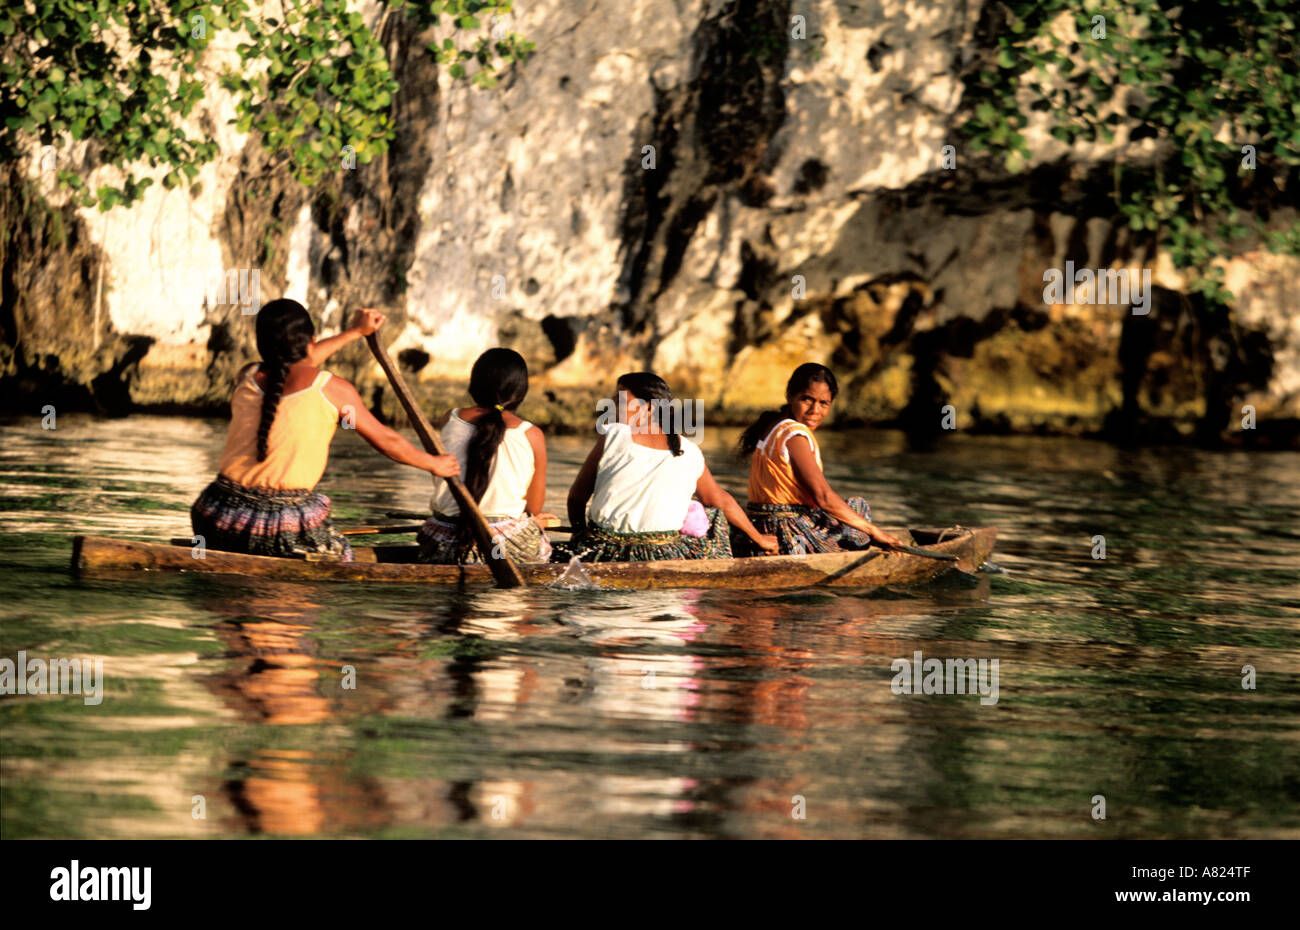 Guatemala, Indian women on a dugout on Rio Dulce river Stock Photo